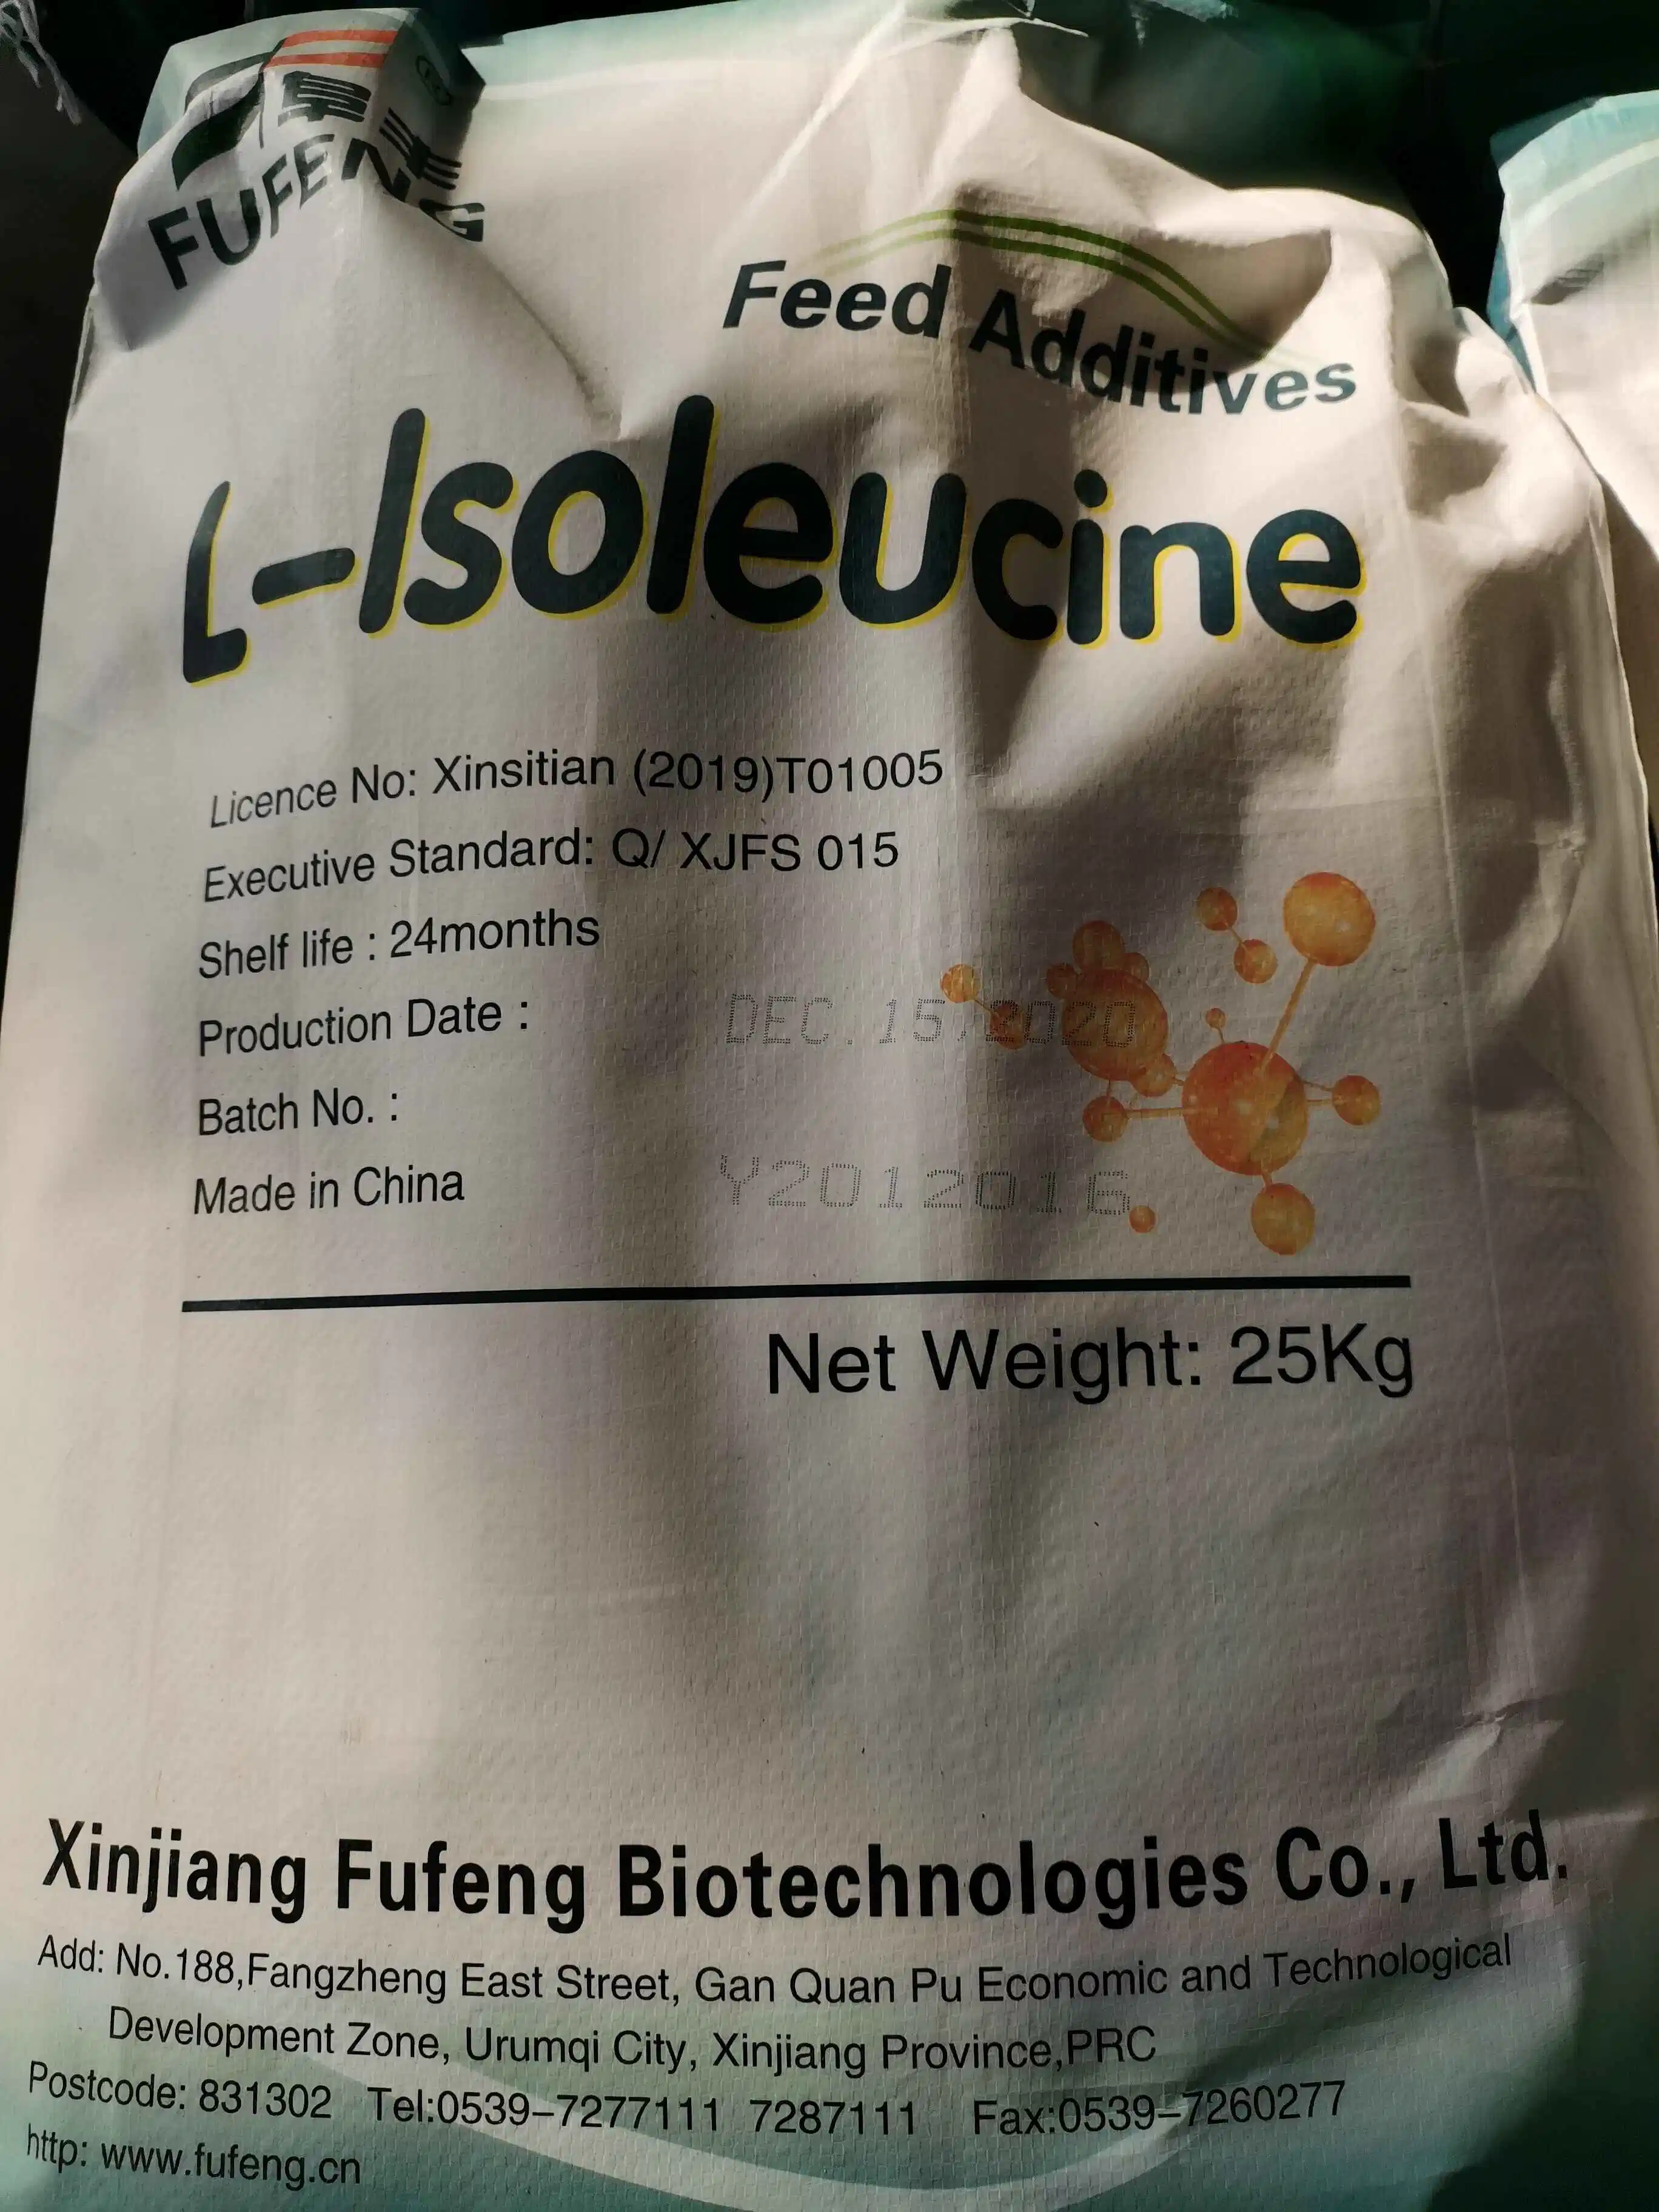 L-Isoleucine Feed Grade for Poultry